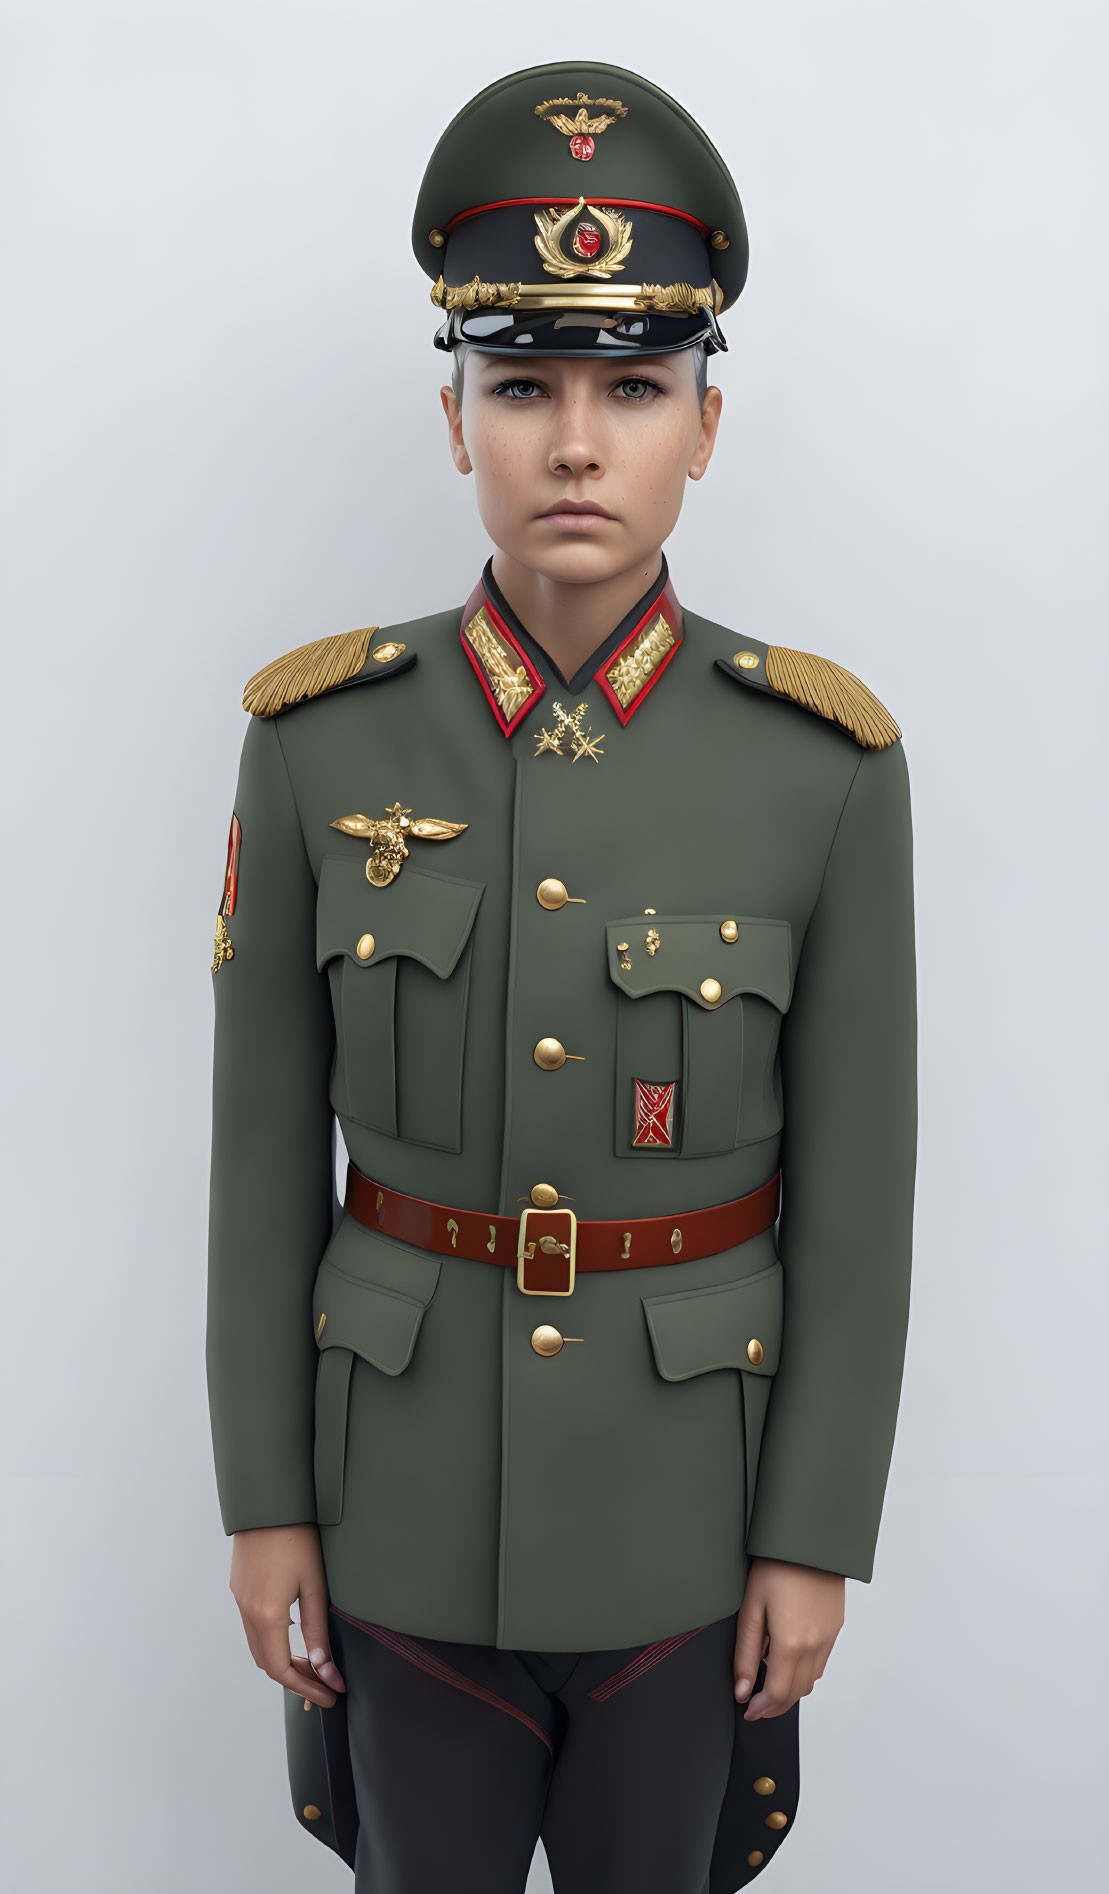 High-ranking military personnel in detailed uniform with medals and peaked cap.